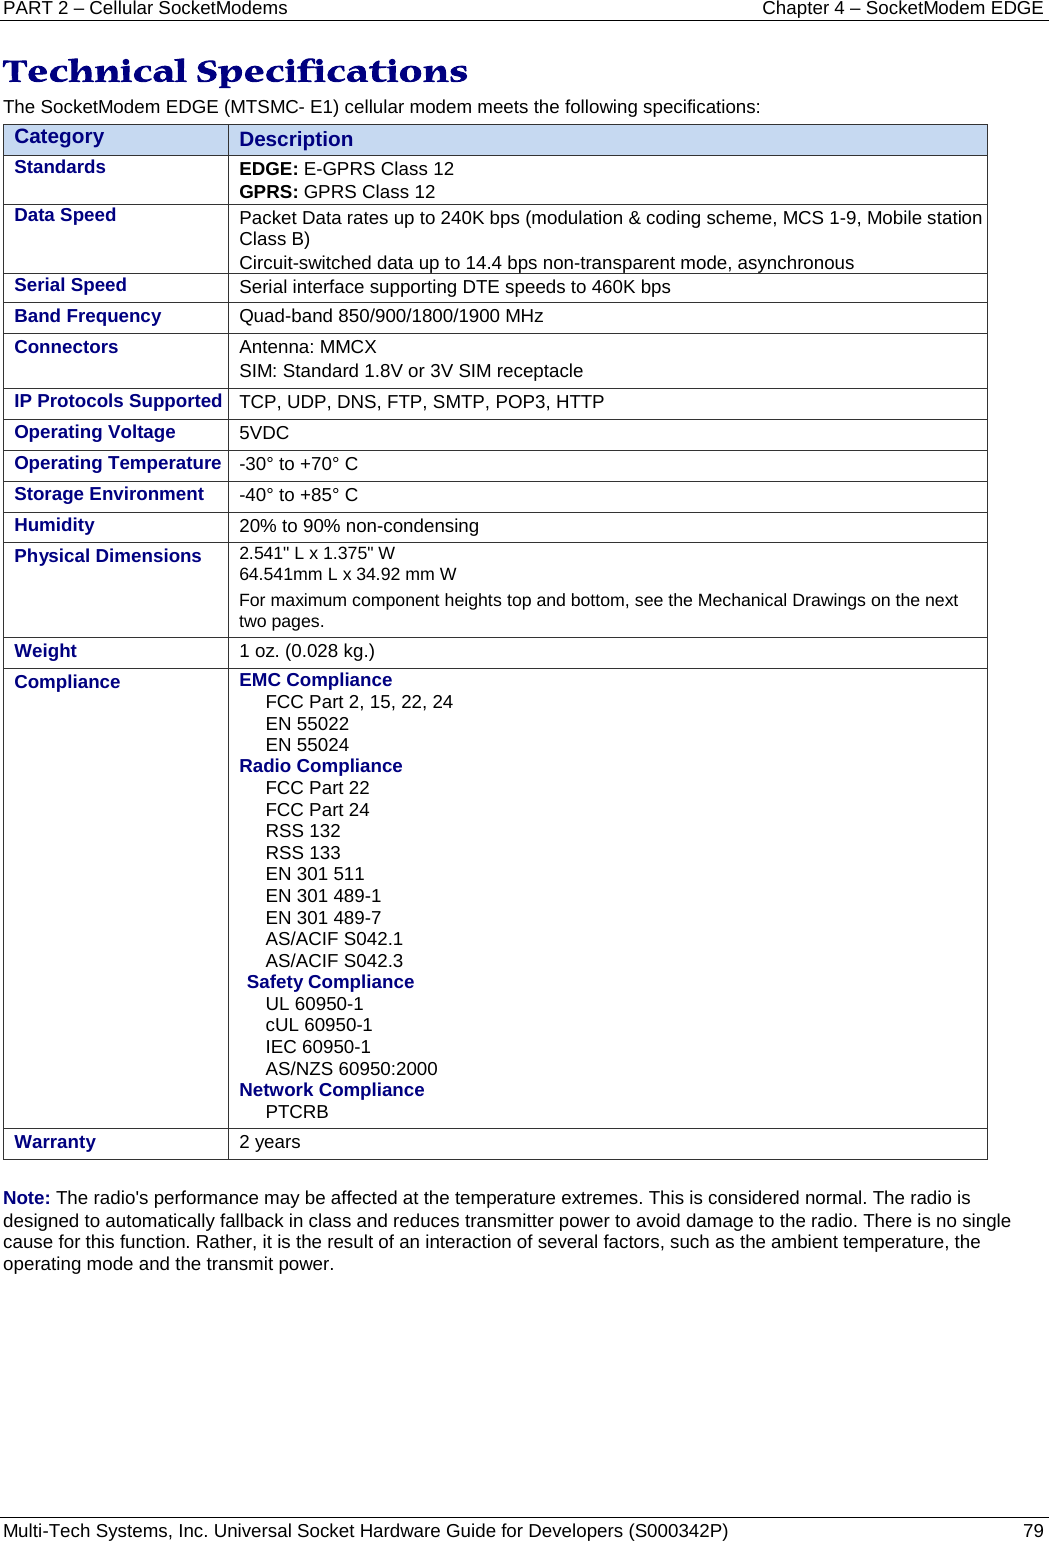 PART 2 – Cellular SocketModems Chapter 4 – SocketModem EDGE Multi-Tech Systems, Inc. Universal Socket Hardware Guide for Developers (S000342P)  79  Technical Specifications The SocketModem EDGE (MTSMC- E1) cellular modem meets the following specifications:  Category Description   Standards EDGE: E-GPRS Class 12 GPRS: GPRS Class 12 Data Speed Packet Data rates up to 240K bps (modulation &amp; coding scheme, MCS 1-9, Mobile station Class B) Circuit-switched data up to 14.4 bps non-transparent mode, asynchronous Serial Speed Serial interface supporting DTE speeds to 460K bps Band Frequency Quad-band 850/900/1800/1900 MHz Connectors Antenna: MMCX SIM: Standard 1.8V or 3V SIM receptacle IP Protocols Supported TCP, UDP, DNS, FTP, SMTP, POP3, HTTP Operating Voltage 5VDC Operating Temperature -30° to +70° C   Storage Environment -40° to +85° C  Humidity 20% to 90% non-condensing  Physical Dimensions 2.541&quot; L x 1.375&quot; W 64.541mm L x 34.92 mm W For maximum component heights top and bottom, see the Mechanical Drawings on the next two pages. Weight 1 oz. (0.028 kg.)  Compliance EMC Compliance  FCC Part 2, 15, 22, 24 EN 55022 EN 55024 Radio Compliance     FCC Part 22 FCC Part 24 RSS 132 RSS 133 EN 301 511 EN 301 489-1 EN 301 489-7 AS/ACIF S042.1 AS/ACIF S042.3 Safety Compliance UL 60950-1 cUL 60950-1 IEC 60950-1 AS/NZS 60950:2000 Network Compliance  PTCRB Warranty 2 years  Note: The radio&apos;s performance may be affected at the temperature extremes. This is considered normal. The radio is designed to automatically fallback in class and reduces transmitter power to avoid damage to the radio. There is no single cause for this function. Rather, it is the result of an interaction of several factors, such as the ambient temperature, the operating mode and the transmit power.   